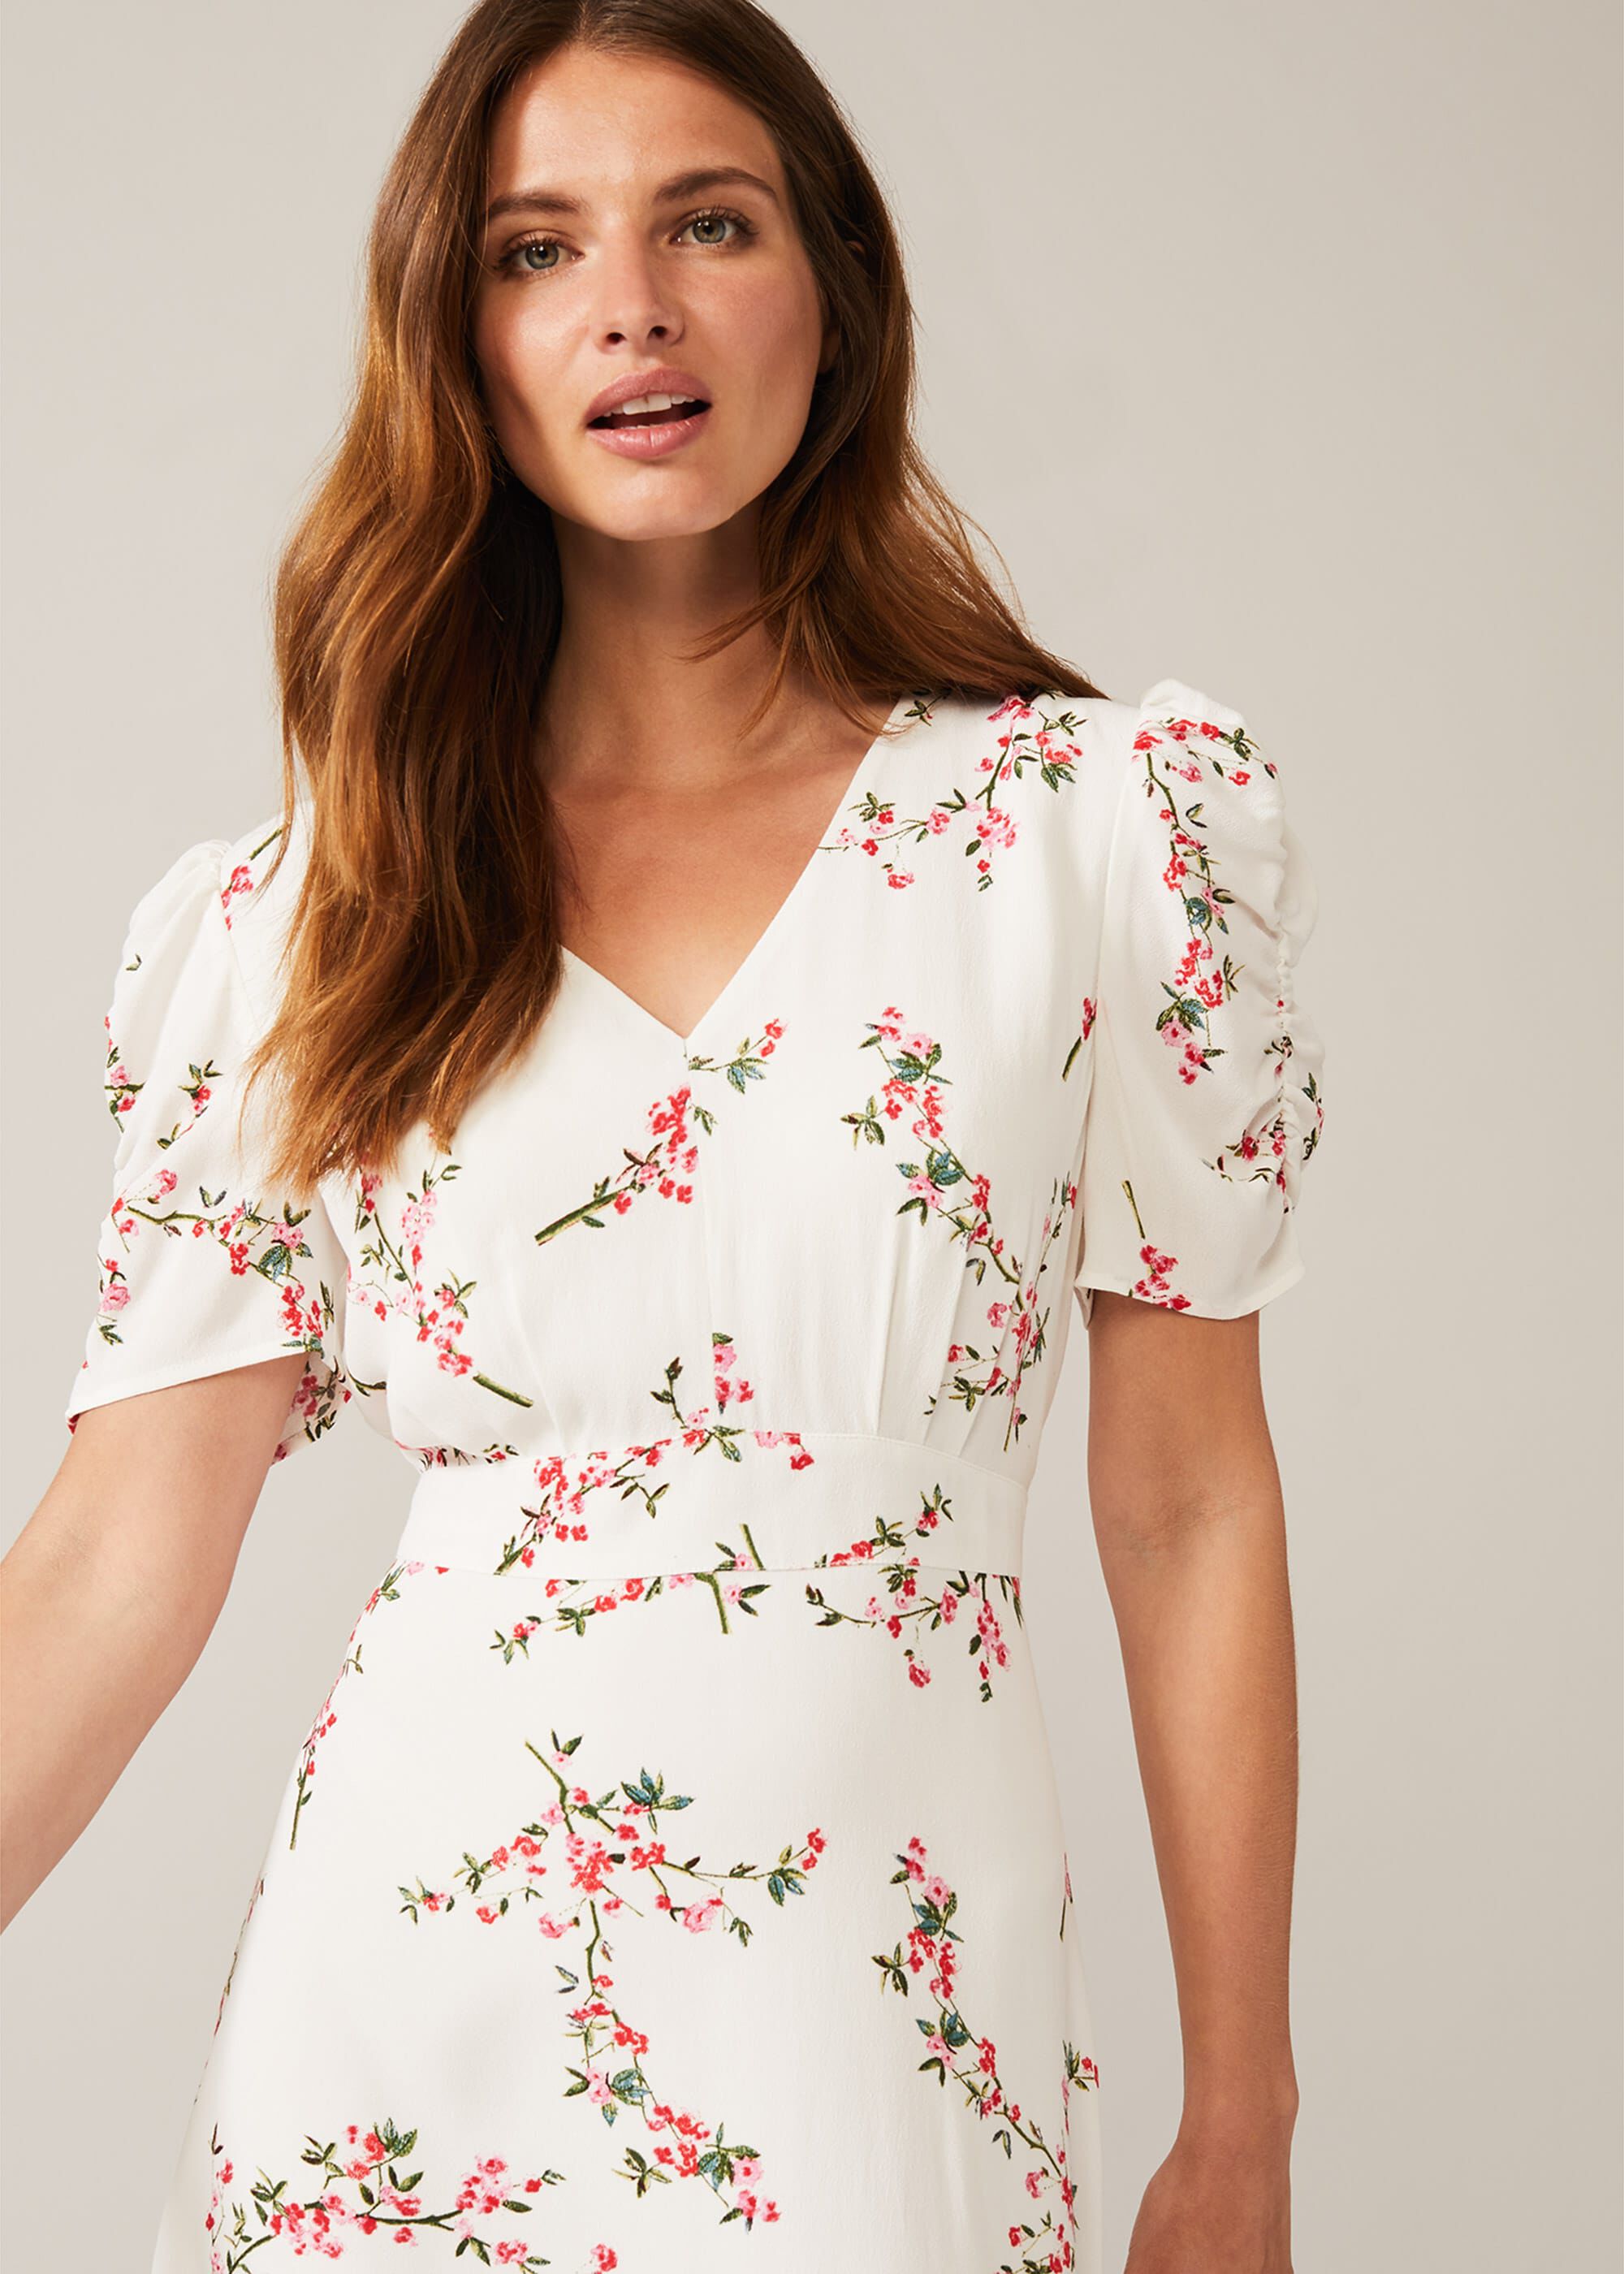 Mae Ditsy Floral Dress | Phase Eight